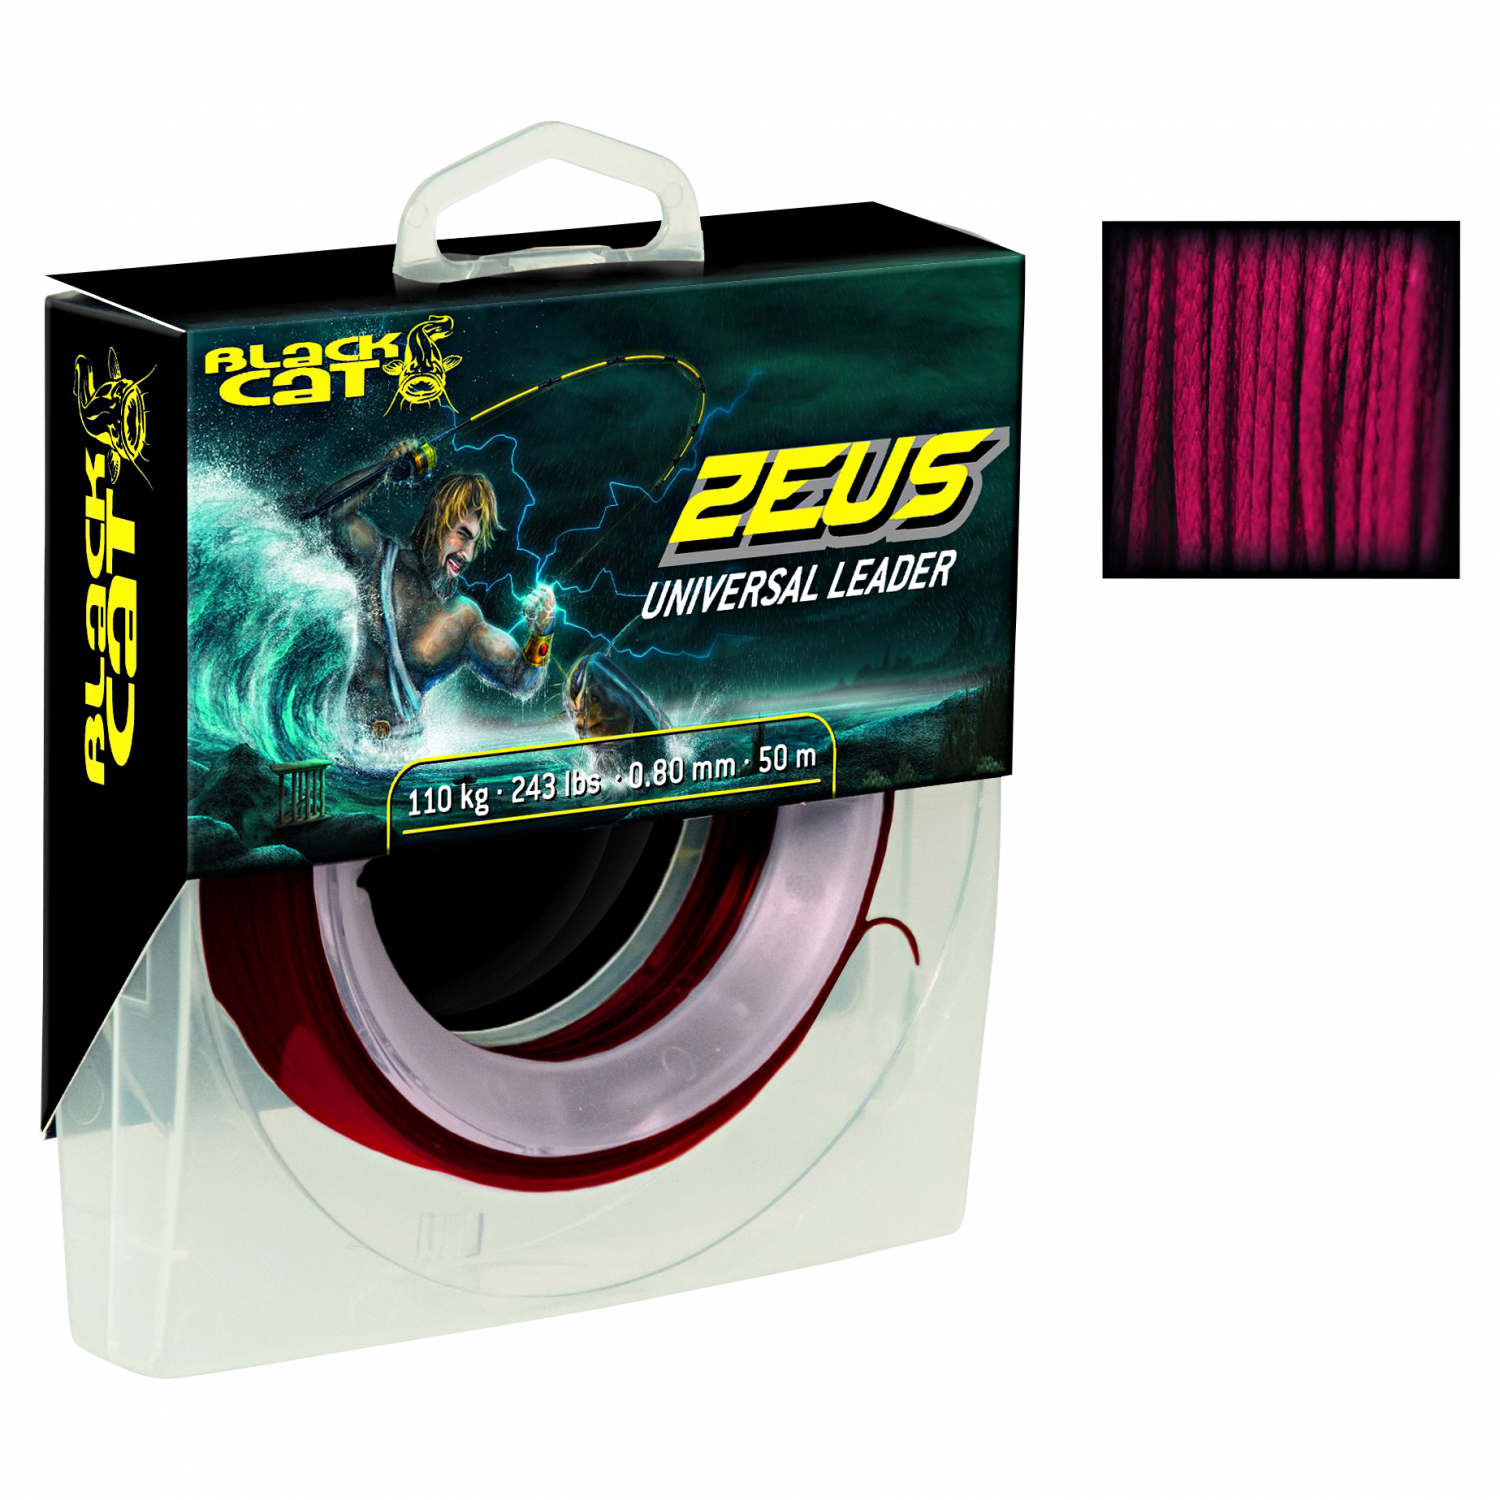 Black Cat Fishing line Zeus Universal Leader at low prices